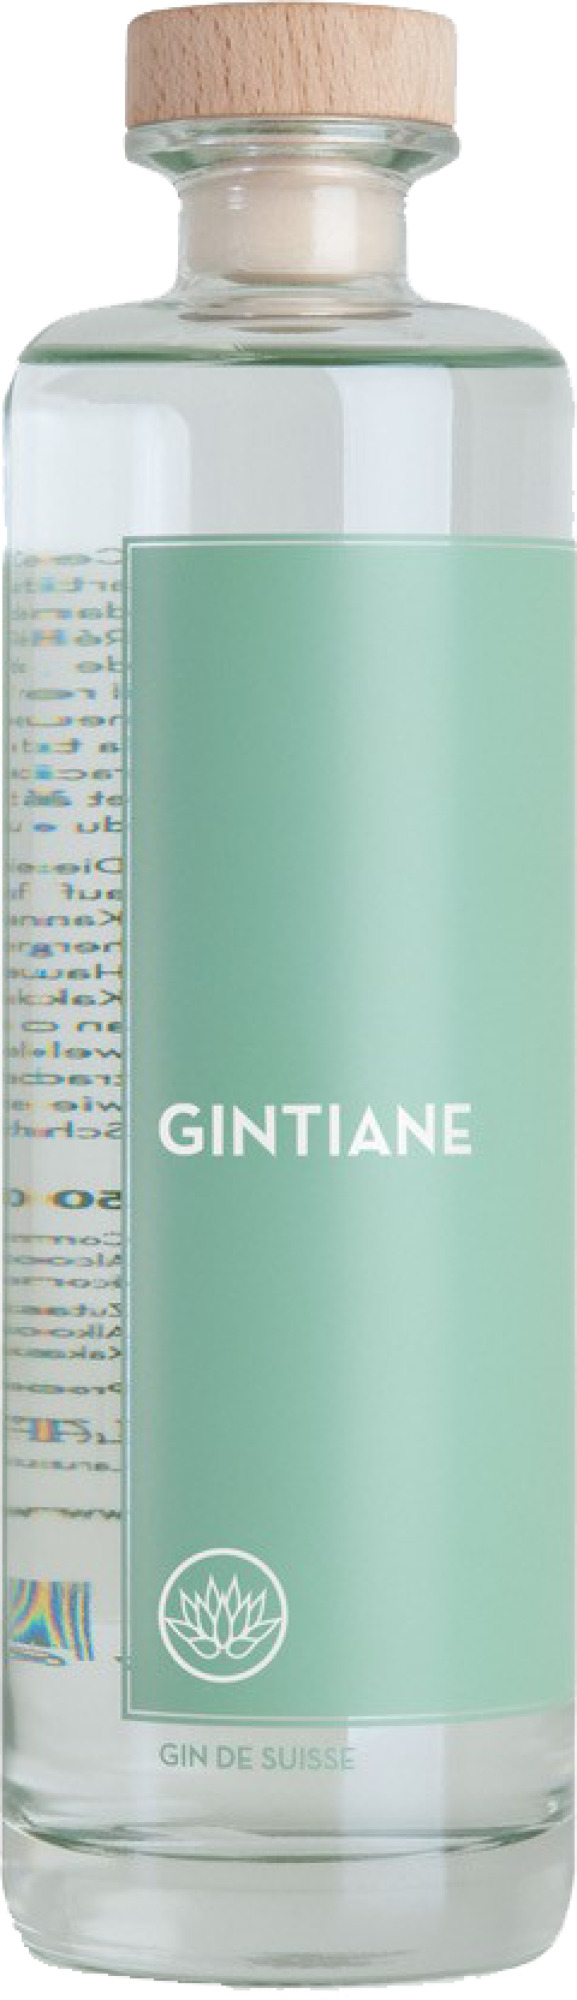 Gintiane London Dry Gin Suisse Larusée